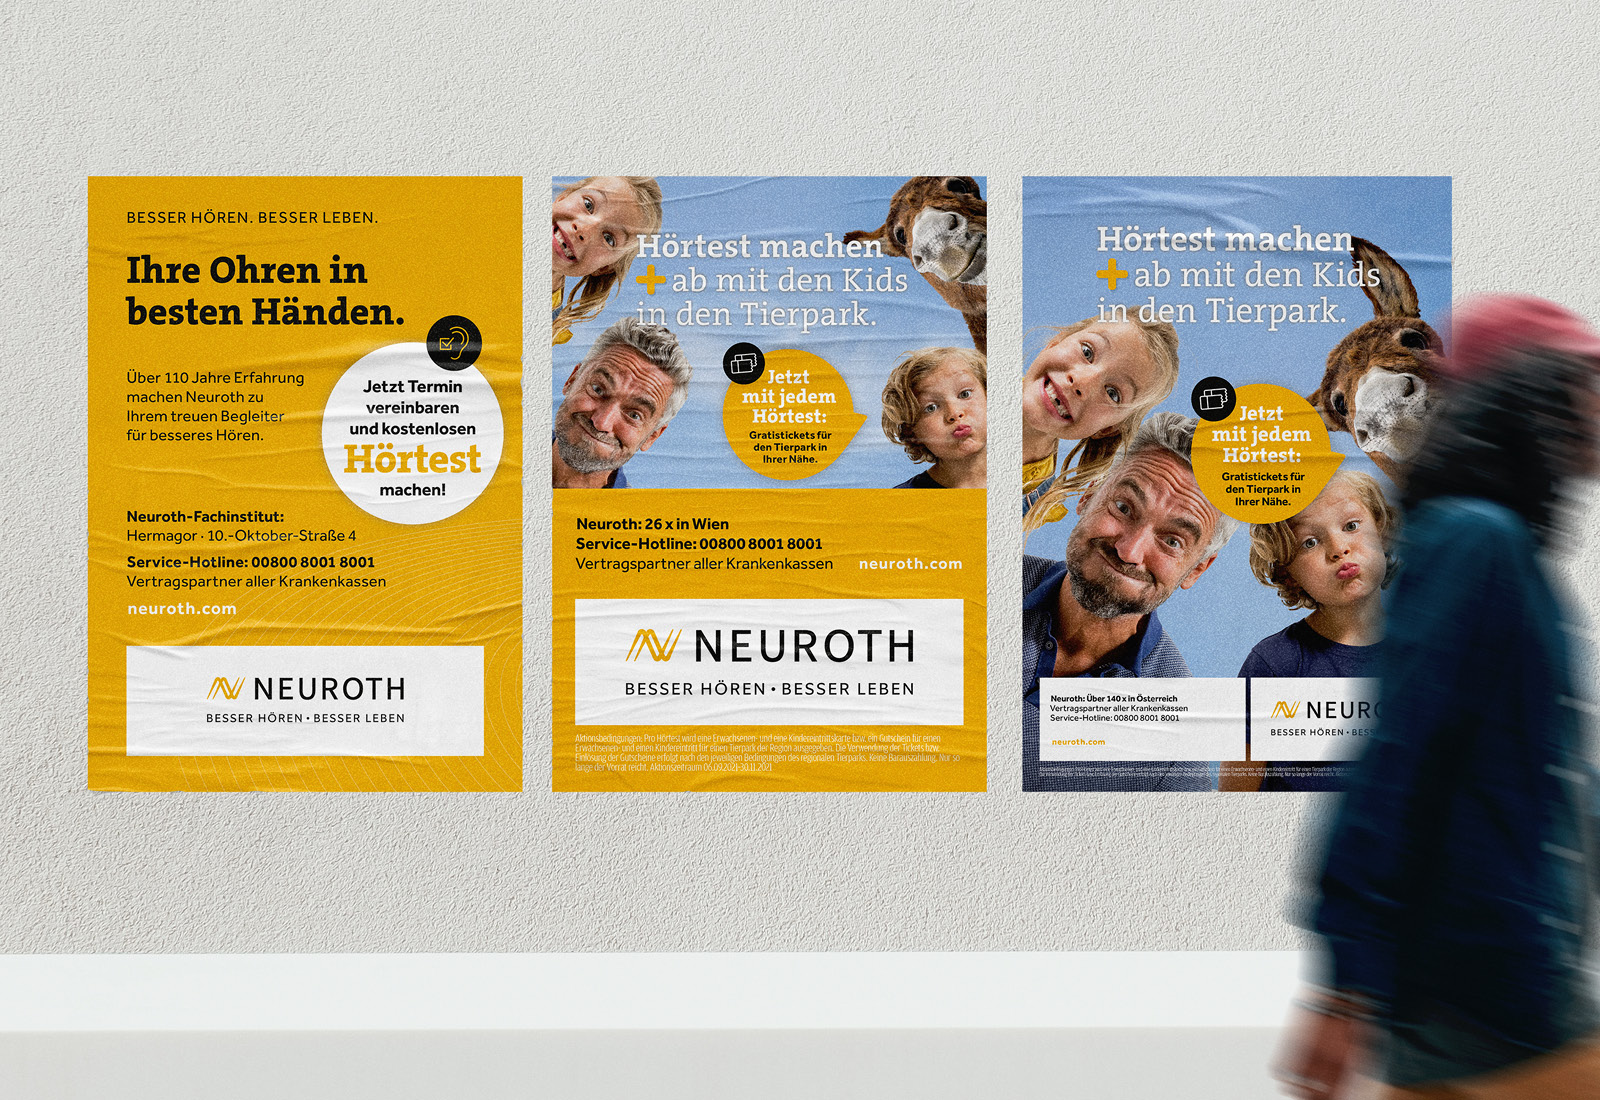 A neuroth poster for branding in Vienna.